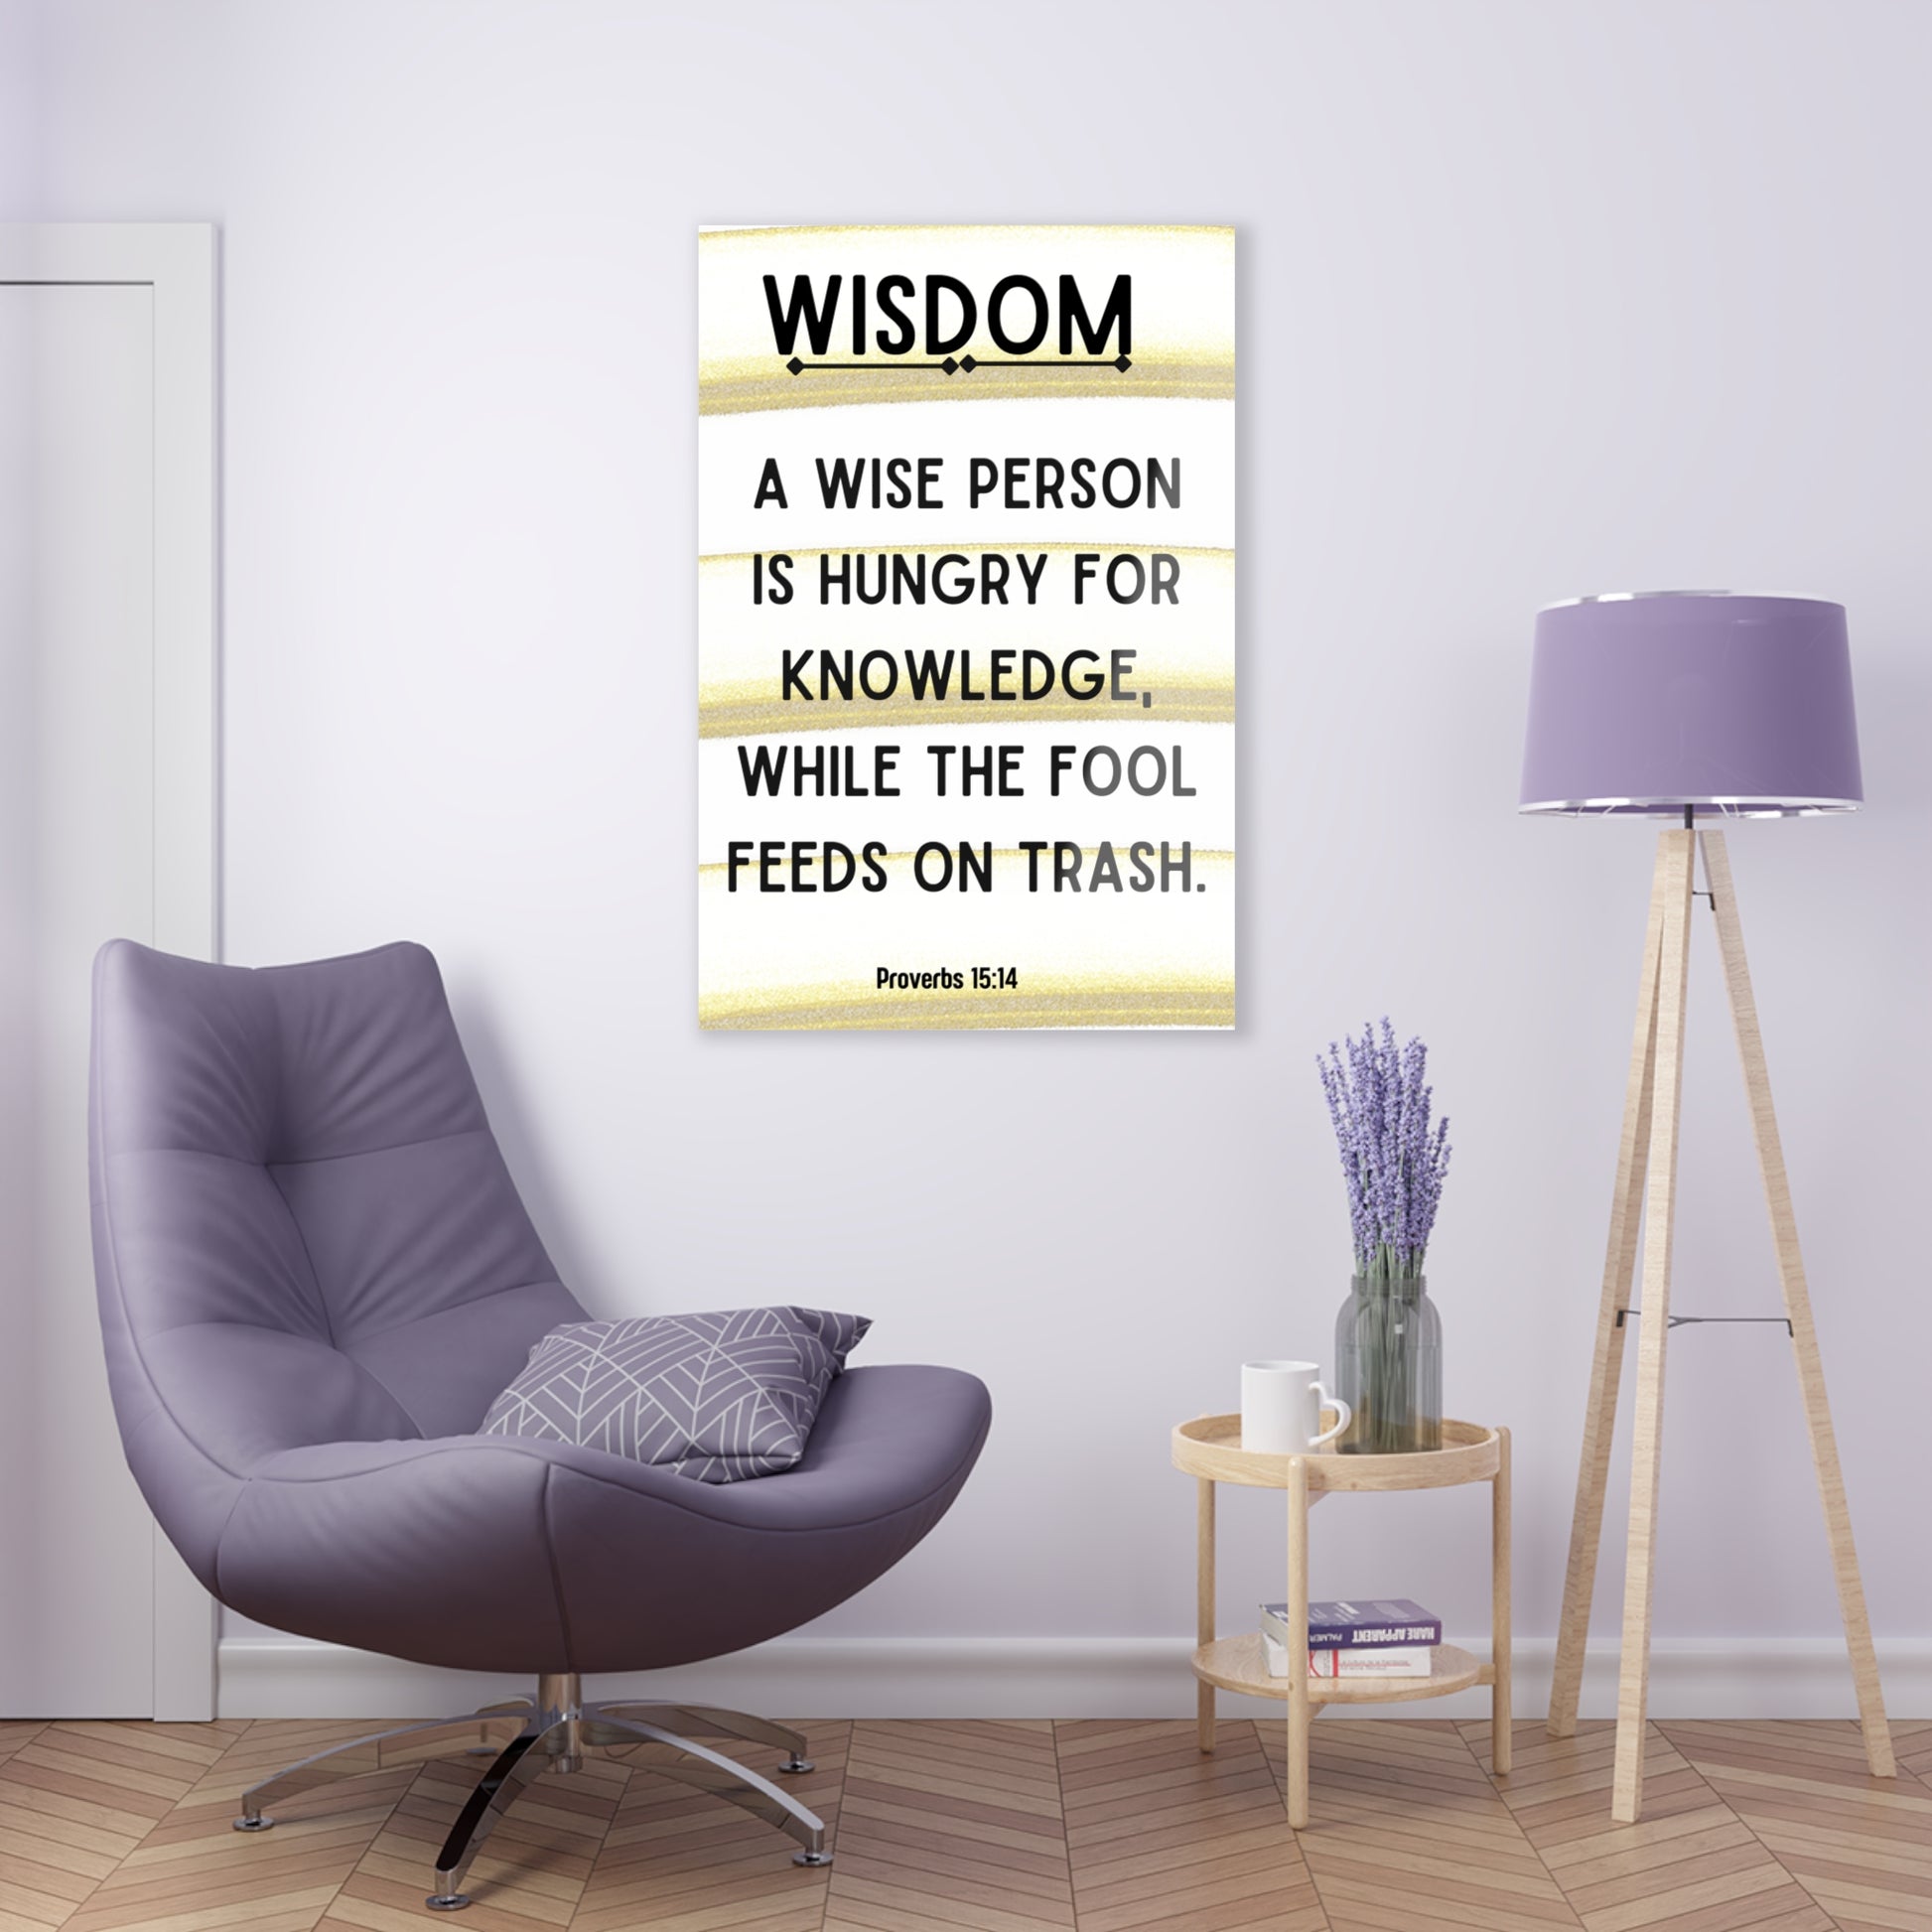 Wall Hanging Decor - Acrylic Print with Inspirational Scripture | Art & Wall Decor,Assembled in the USA,Assembled in USA,Decor,Home & Living,Home Decor,Indoor,Made in the USA,Made in USA,Poster